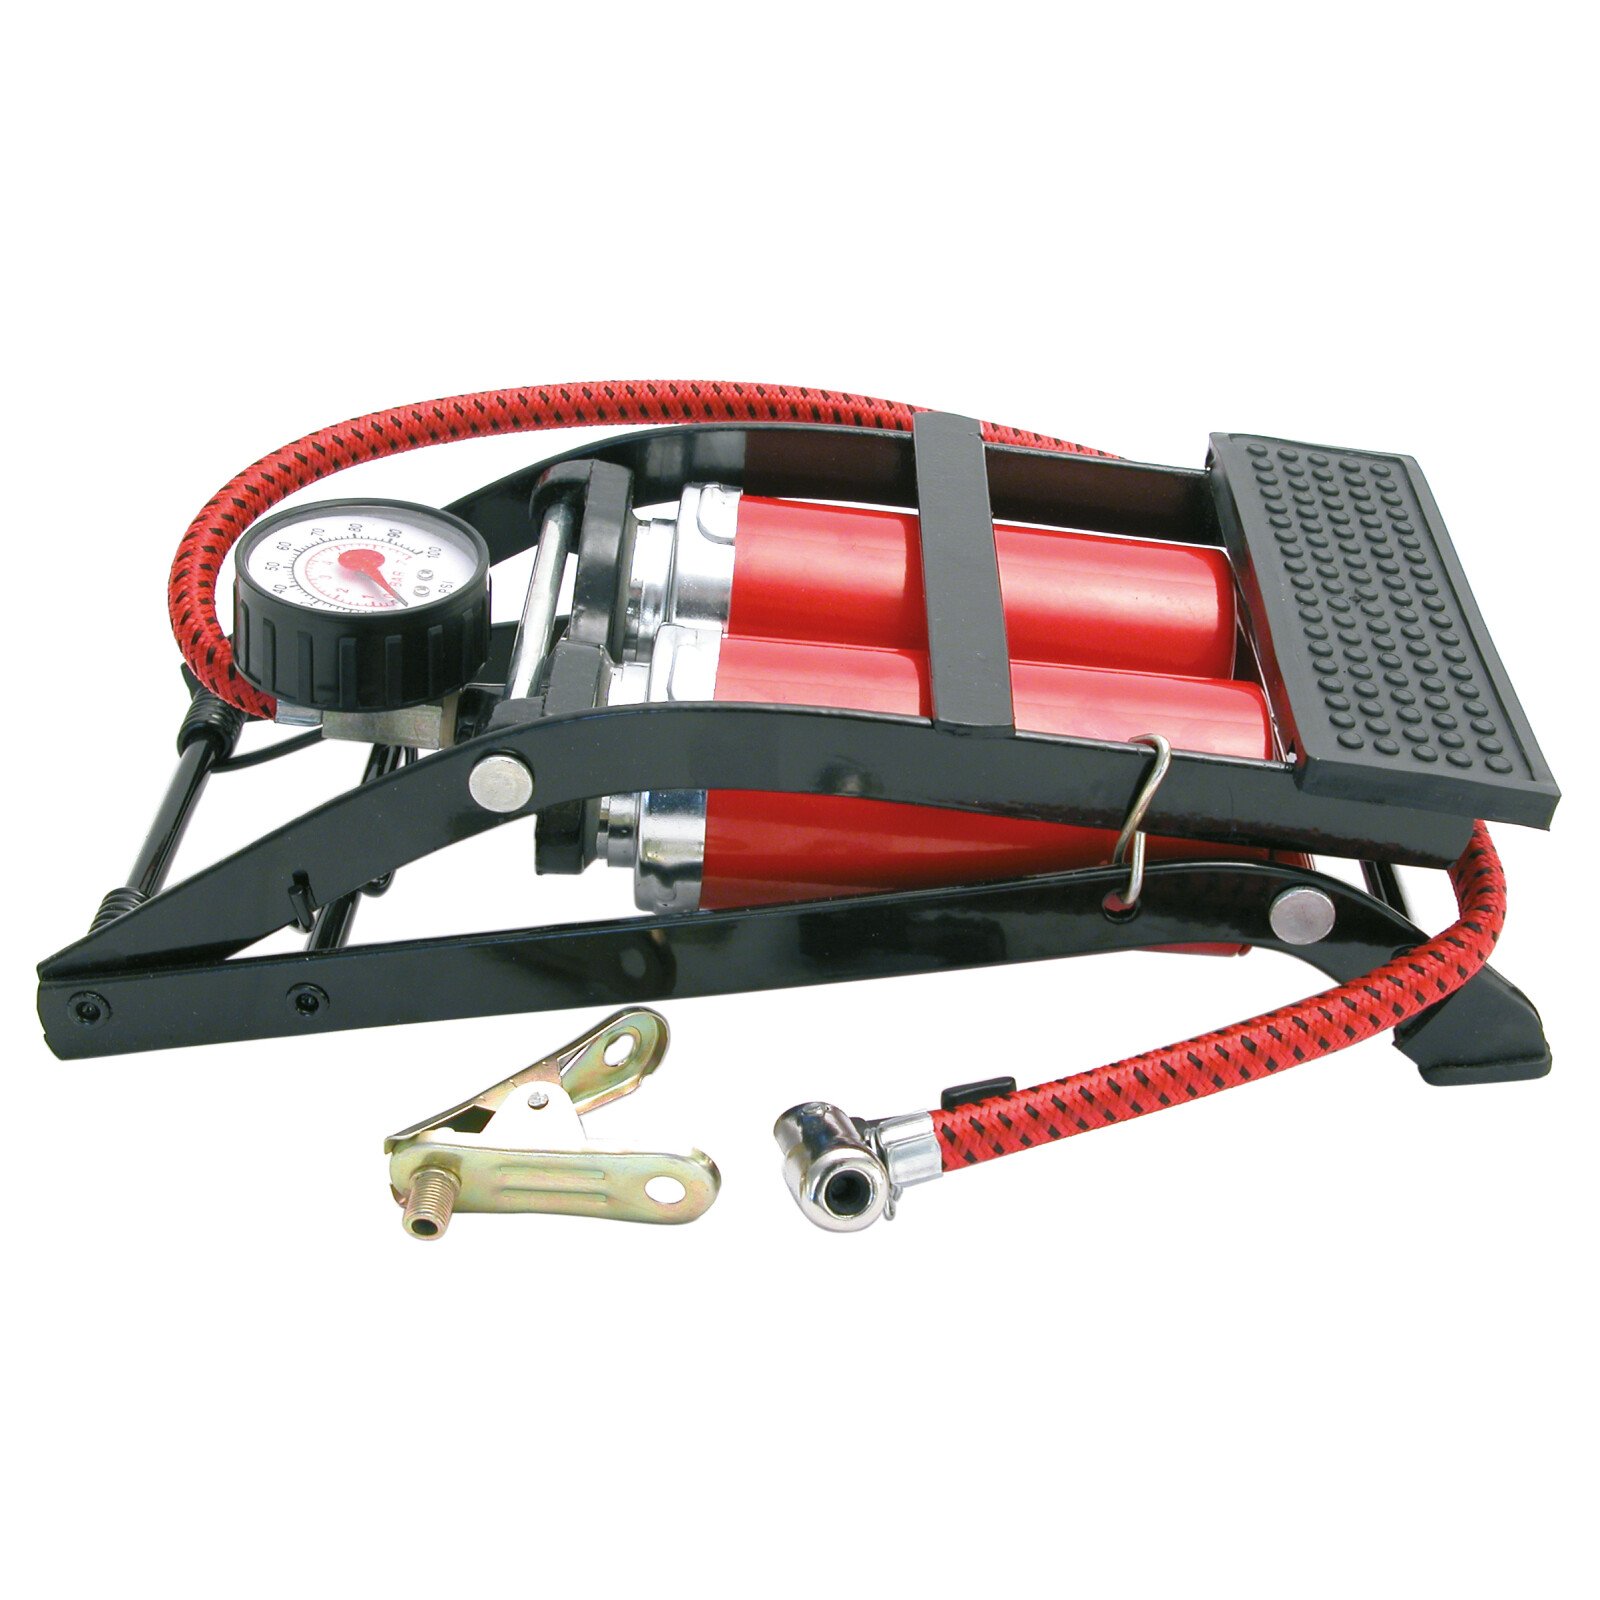 Foot pump with 2 cylinders Carpoint thumb